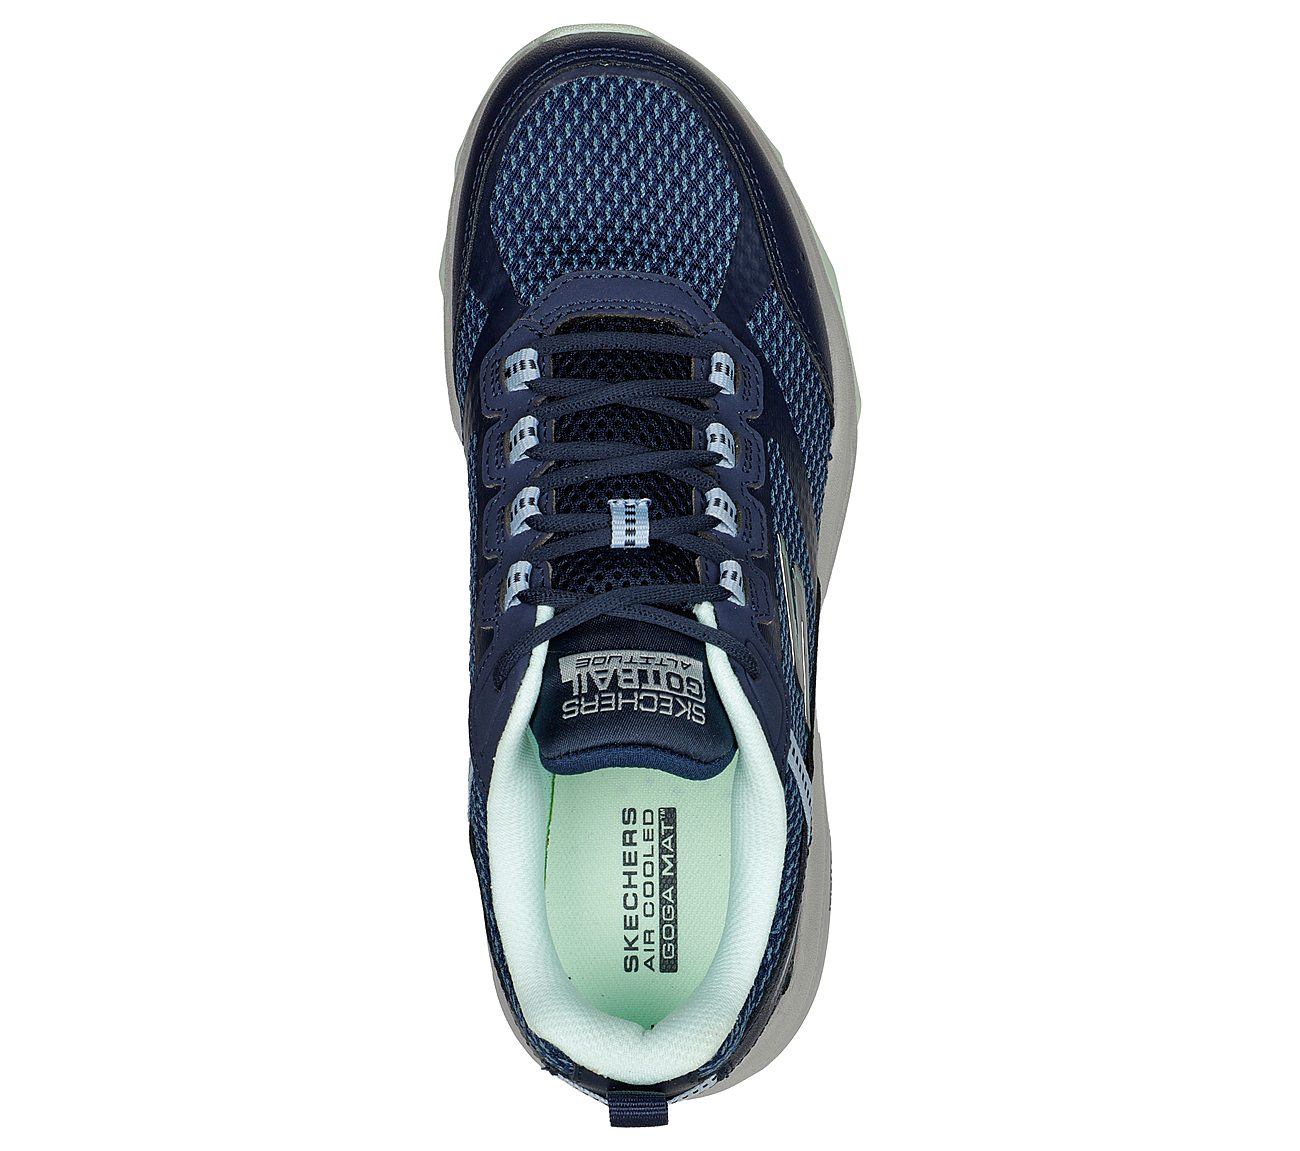 GO RUN TRAIL ALTITUDE, NAVY/TURQUOISE Footwear Top View